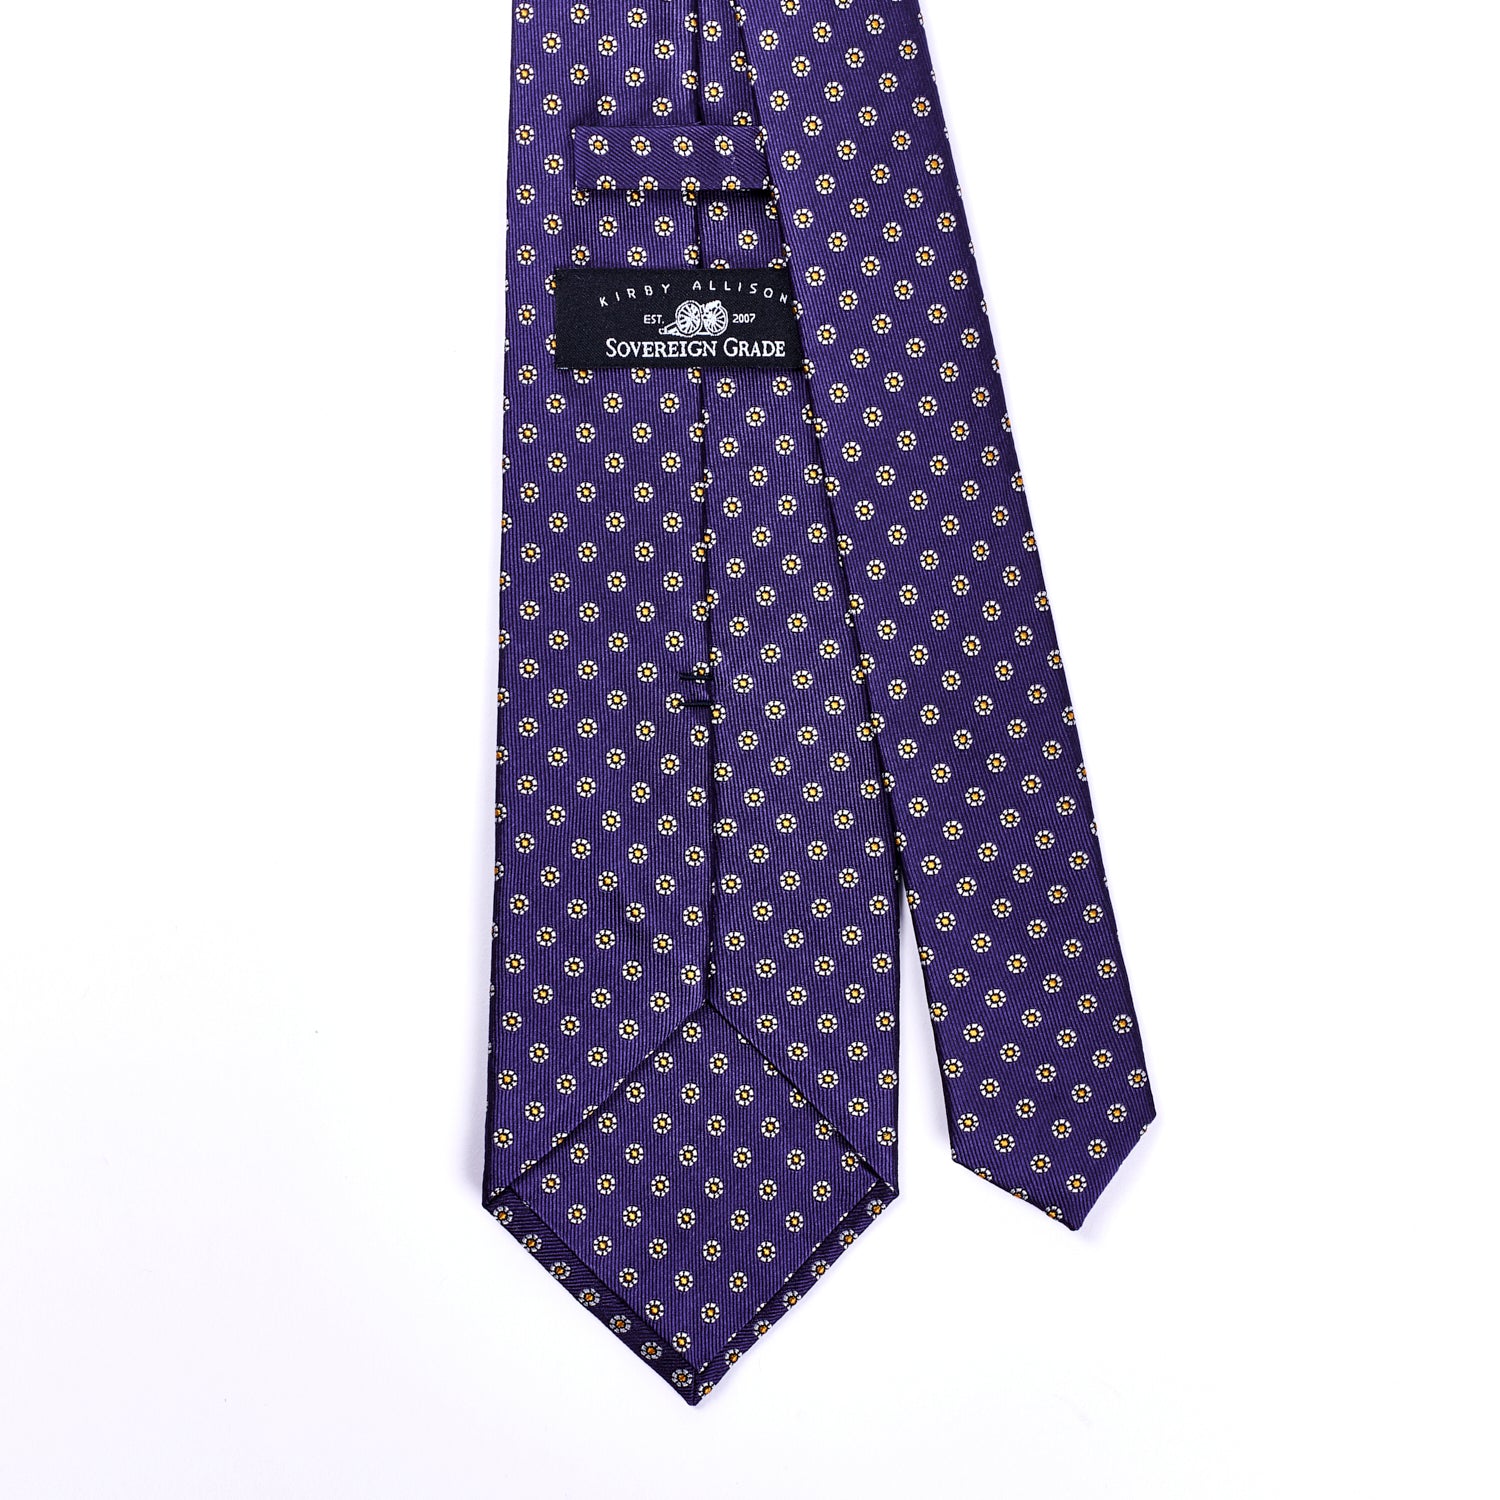 A Sovereign Grade Plum Floral Jacquard tie in purple and gold on a white background, from KirbyAllison.com.